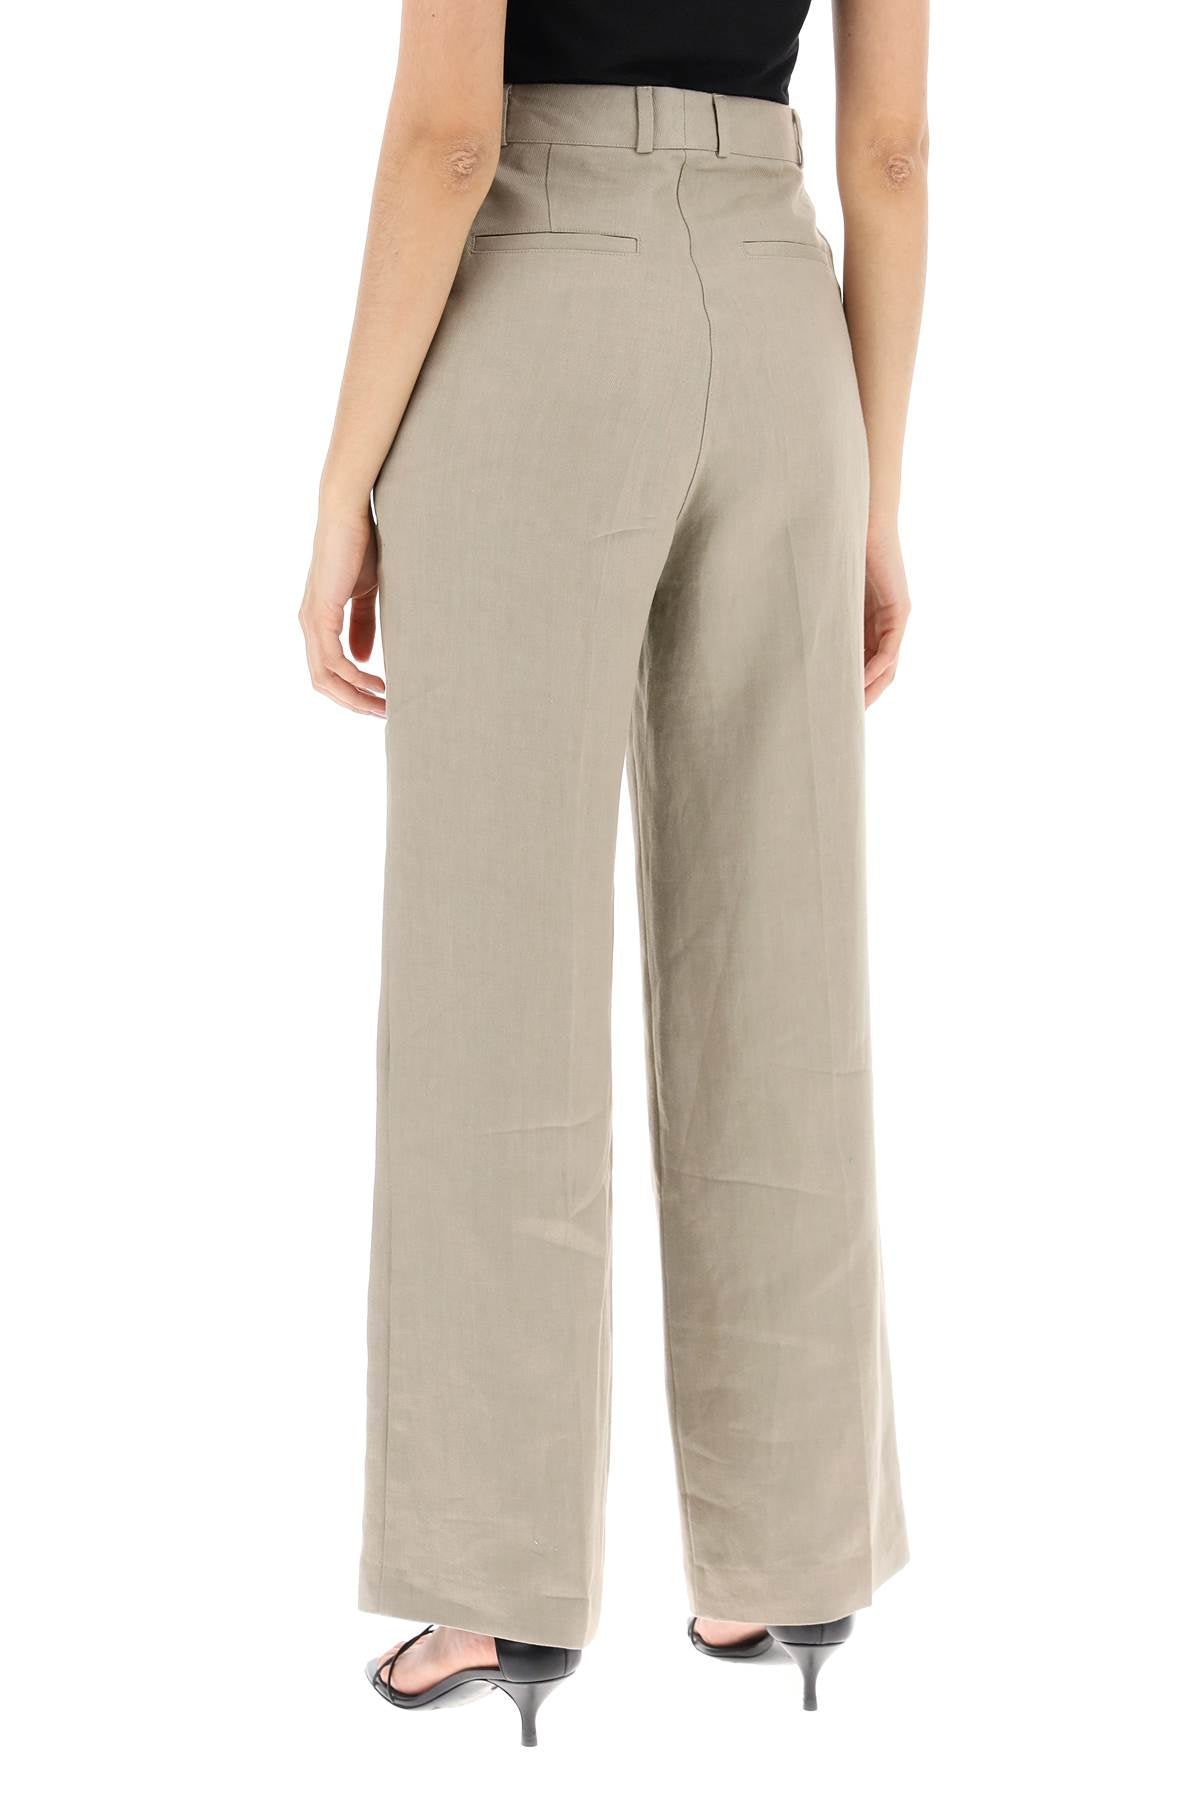 wide-legged pirate pants for women-2